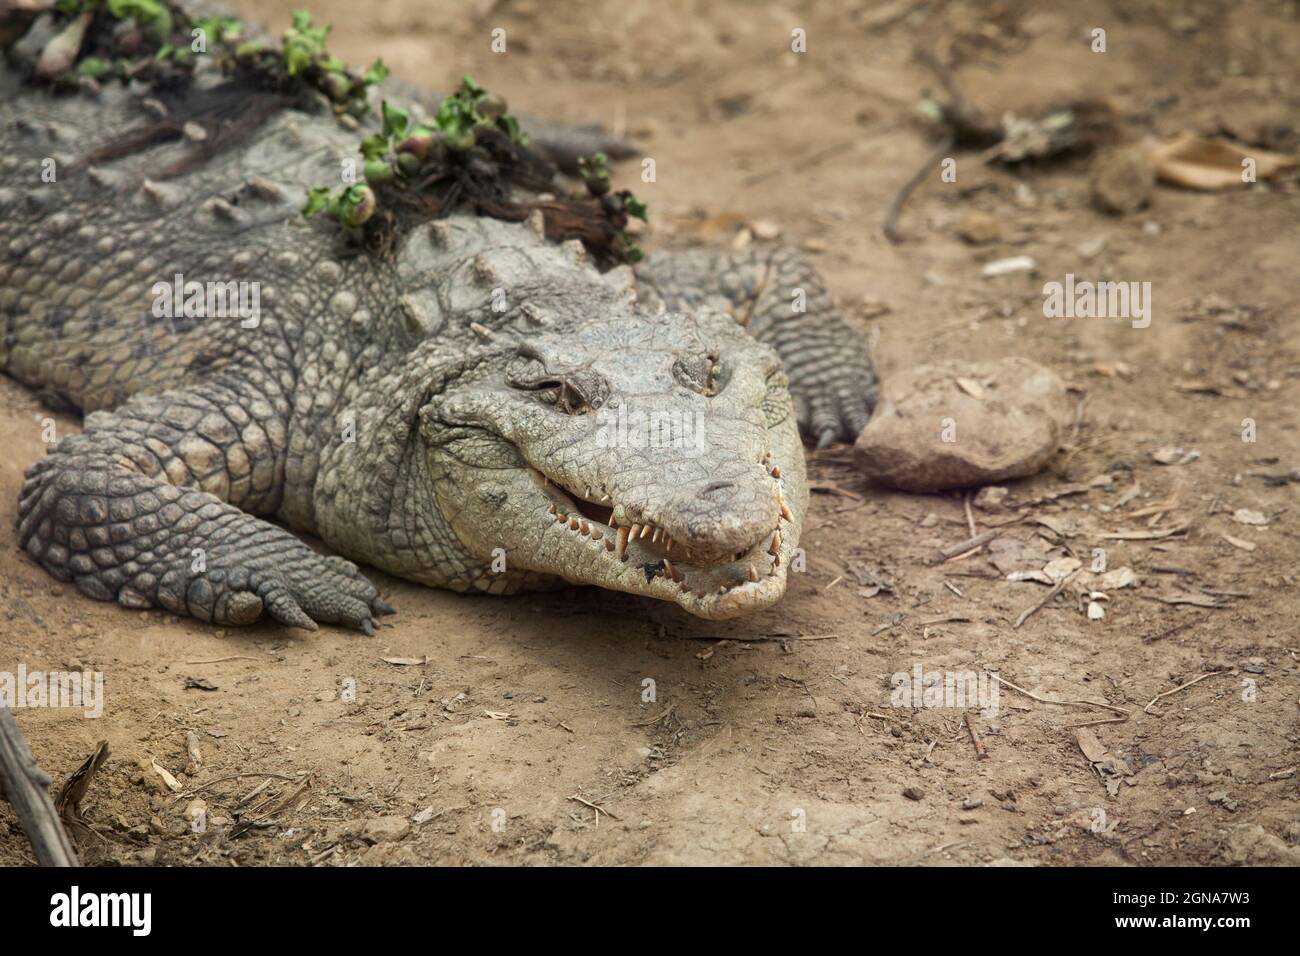 Telephoto medium close up of crocodile on the dirt with open mouth Stock Photo